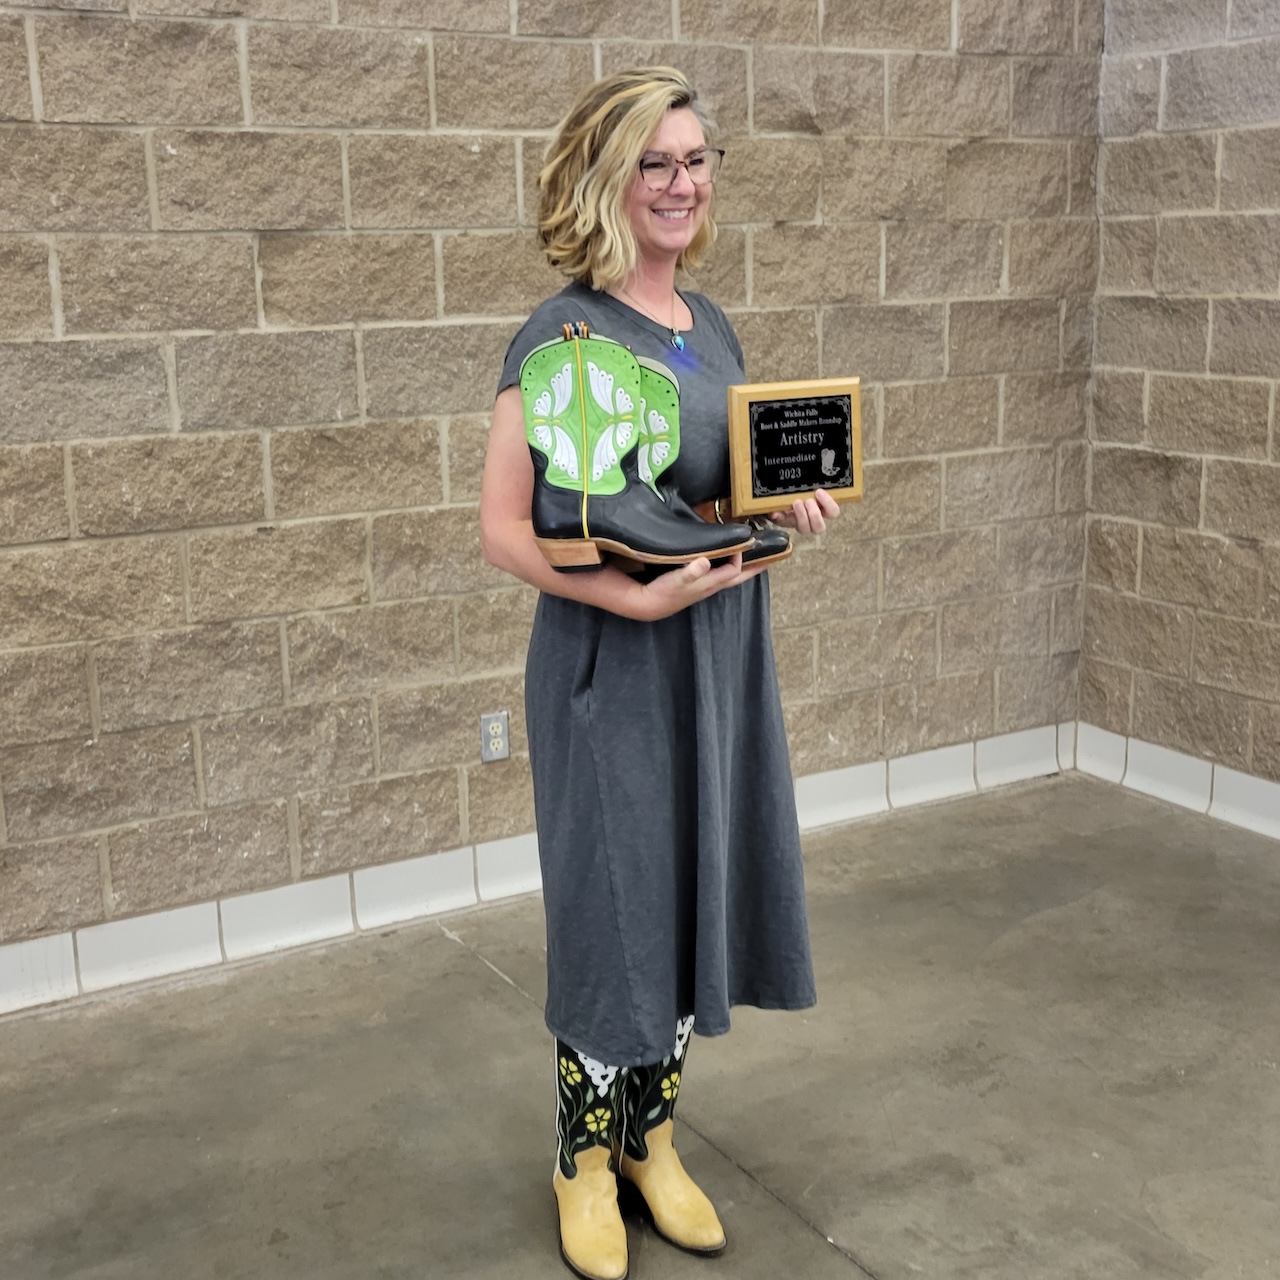 Kelly Howell, owner of Dragonfly Ink Designs, accepting the 2023 Artistry Award for Intermediate Bootmakers at the Wichita Falls Boot and Saddle Show.